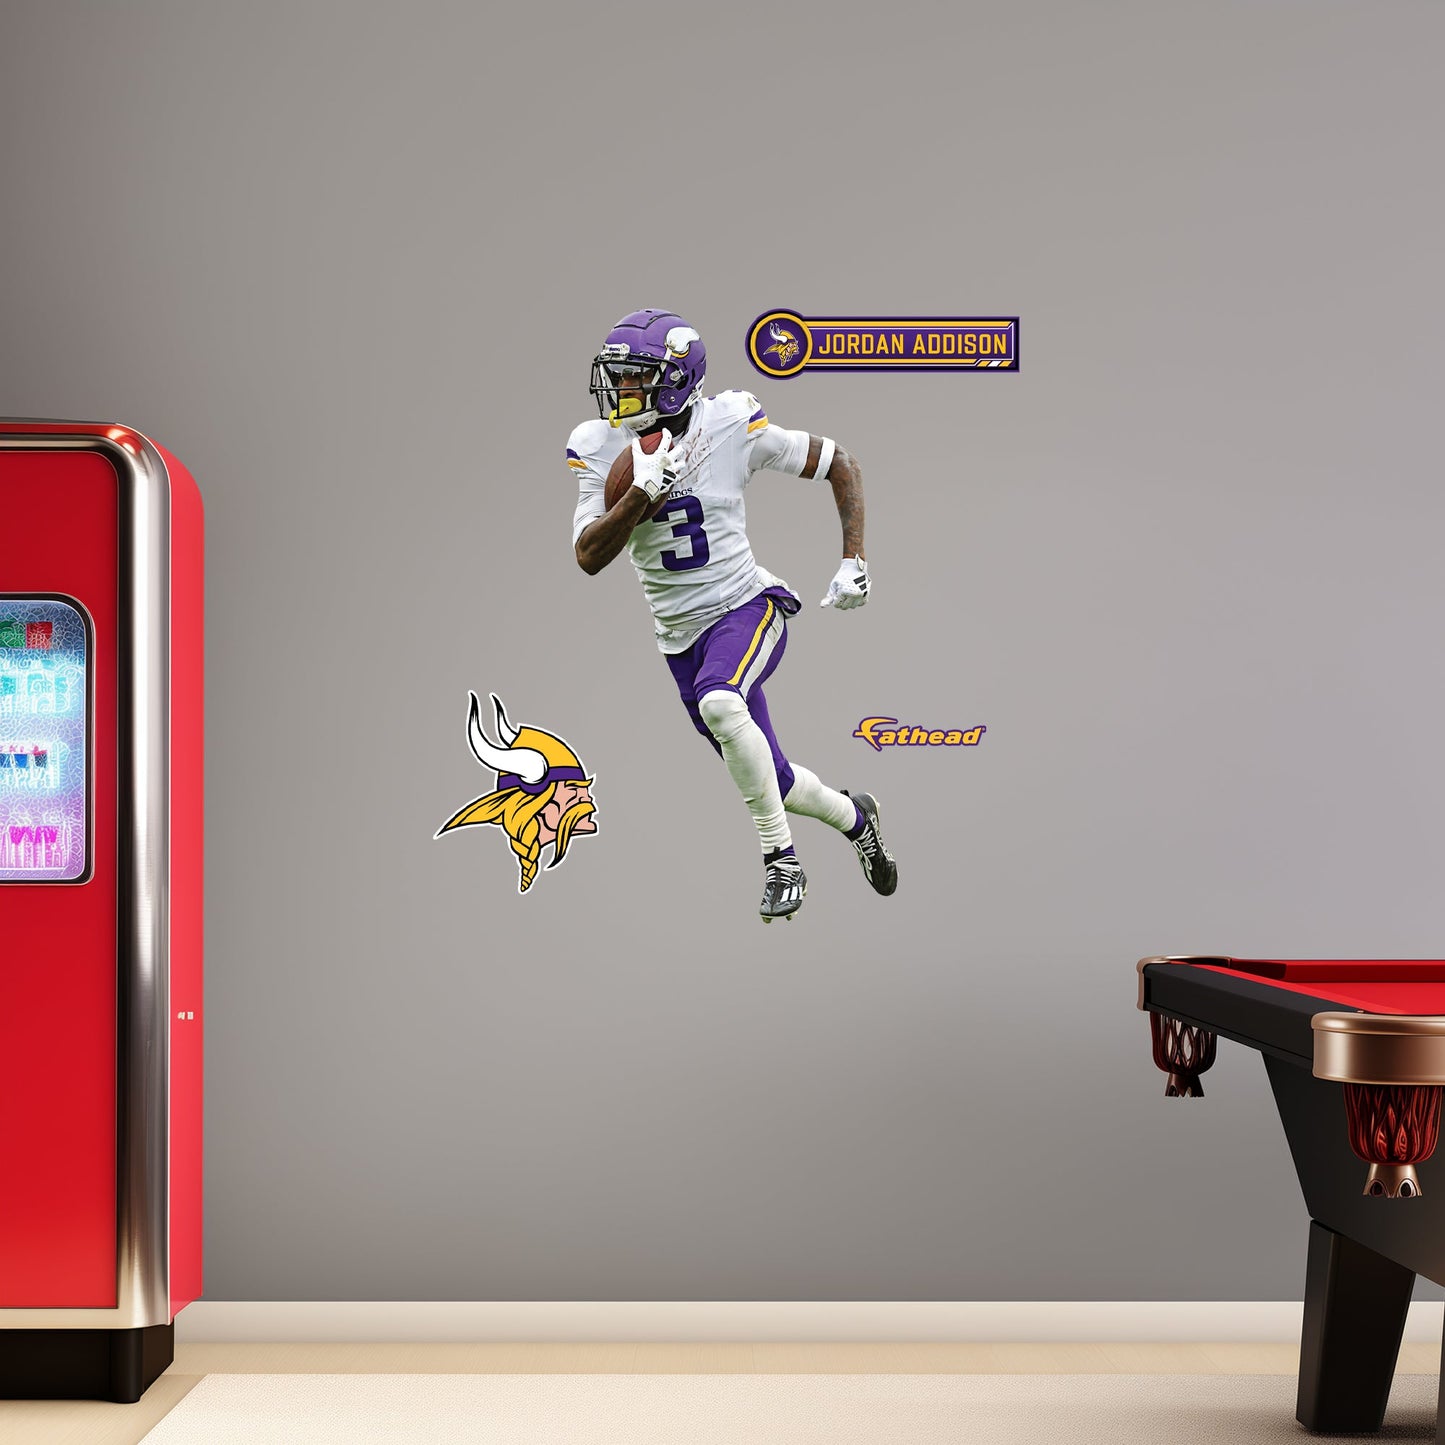 Minnesota Vikings: Jordan Addison         - Officially Licensed NFL Removable     Adhesive Decal